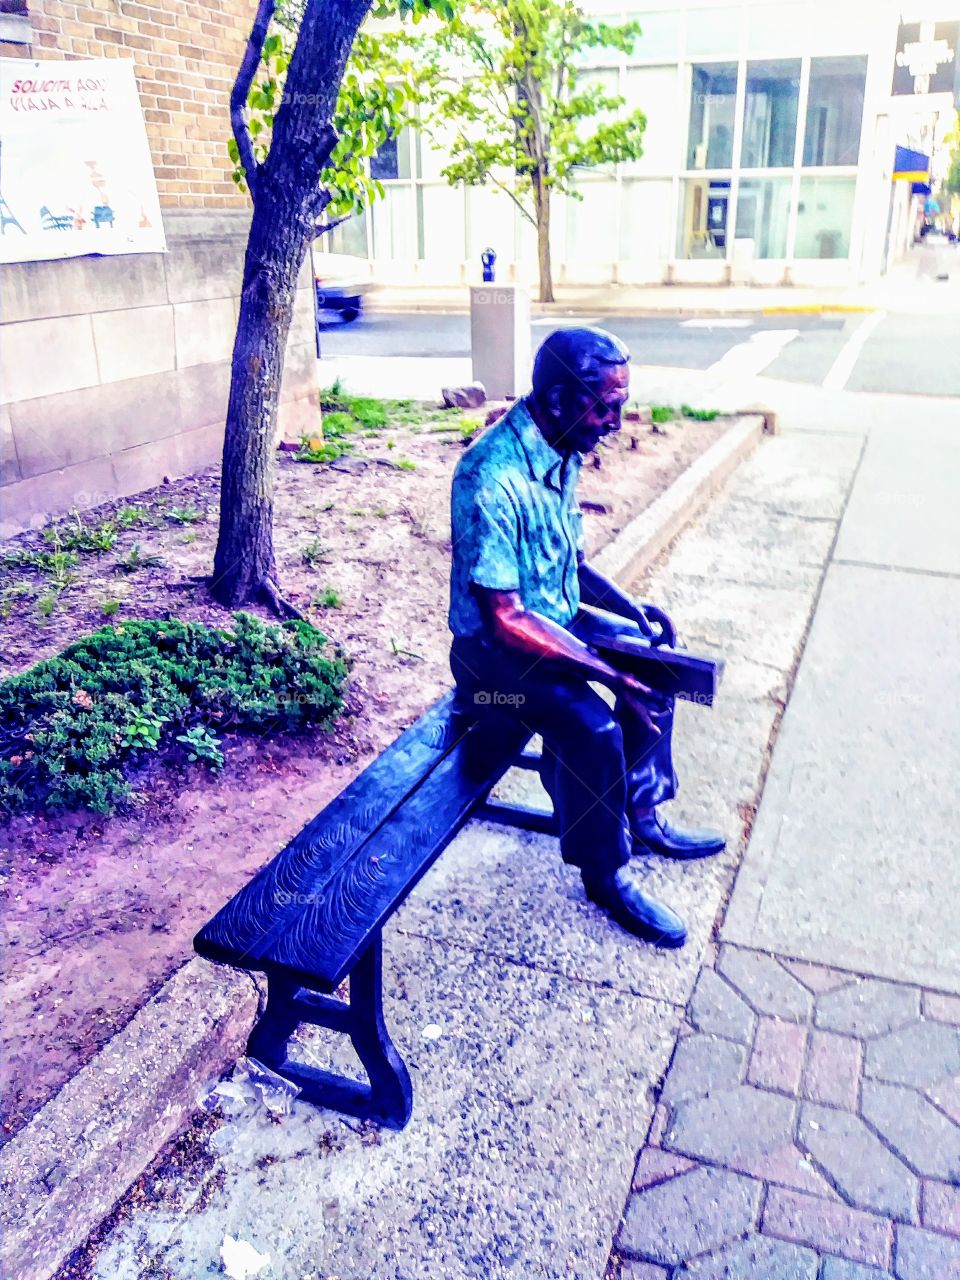 A statue of a man sitting on a bench in Bayonne New Jersey.